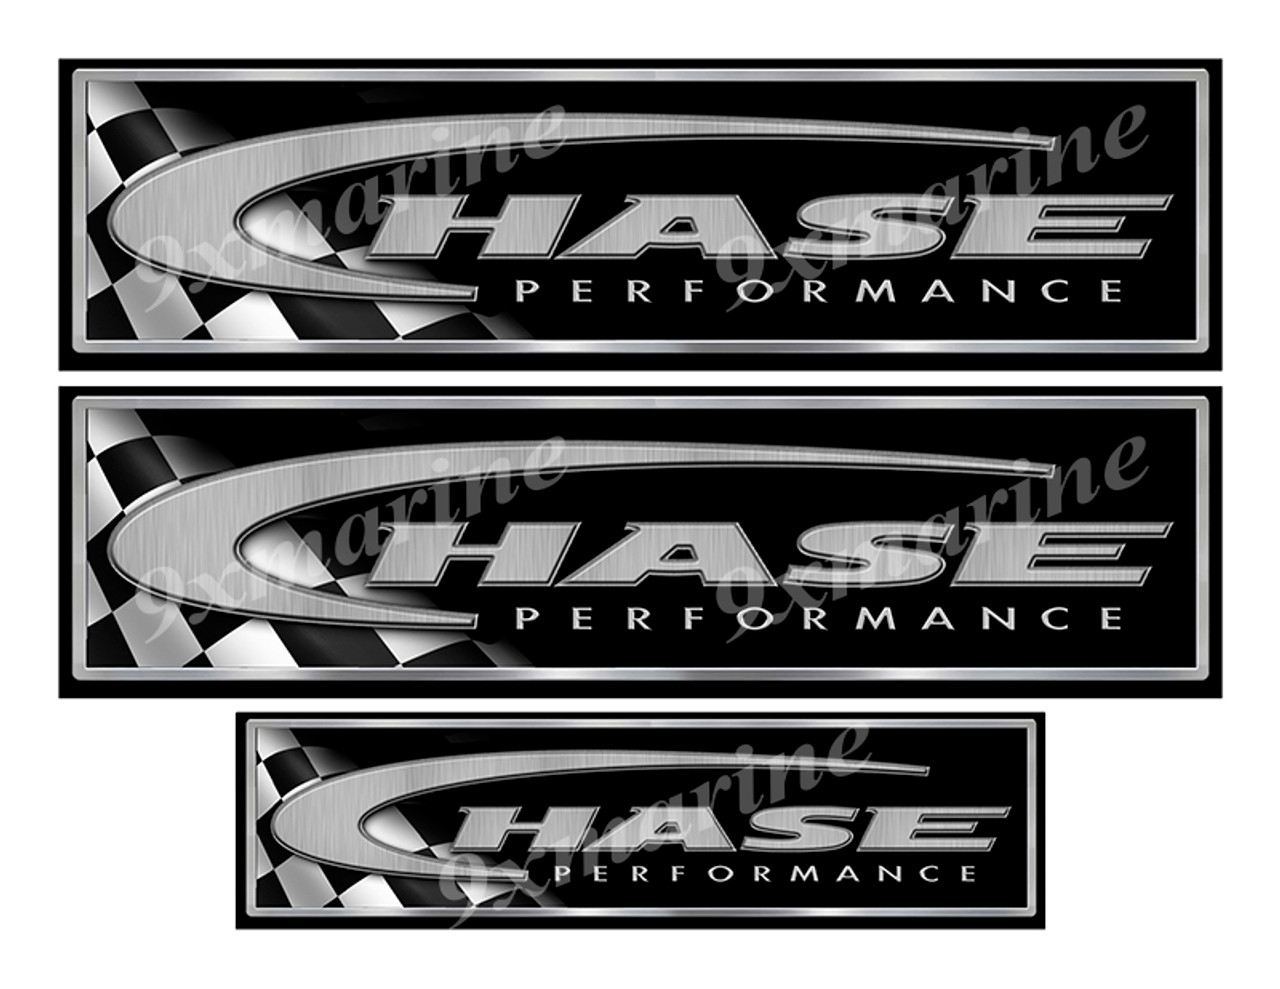 Three Chase Boat Classic Racing 10" and 7" long Stickers